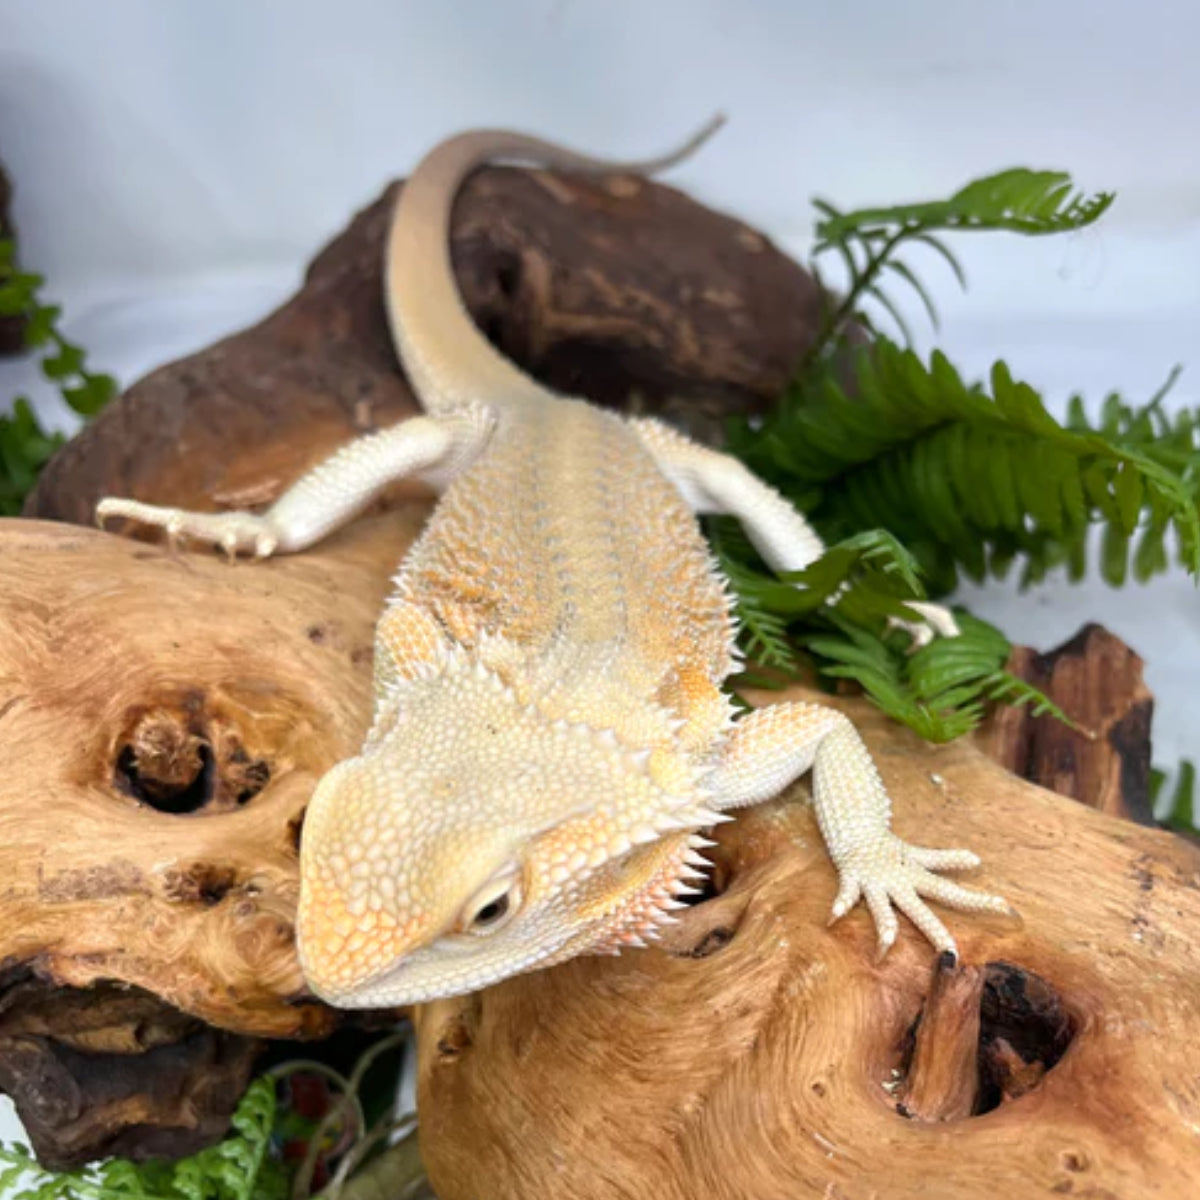 WE HAVE HYPO ZERO BEARDED DRAGON FOR SALE.